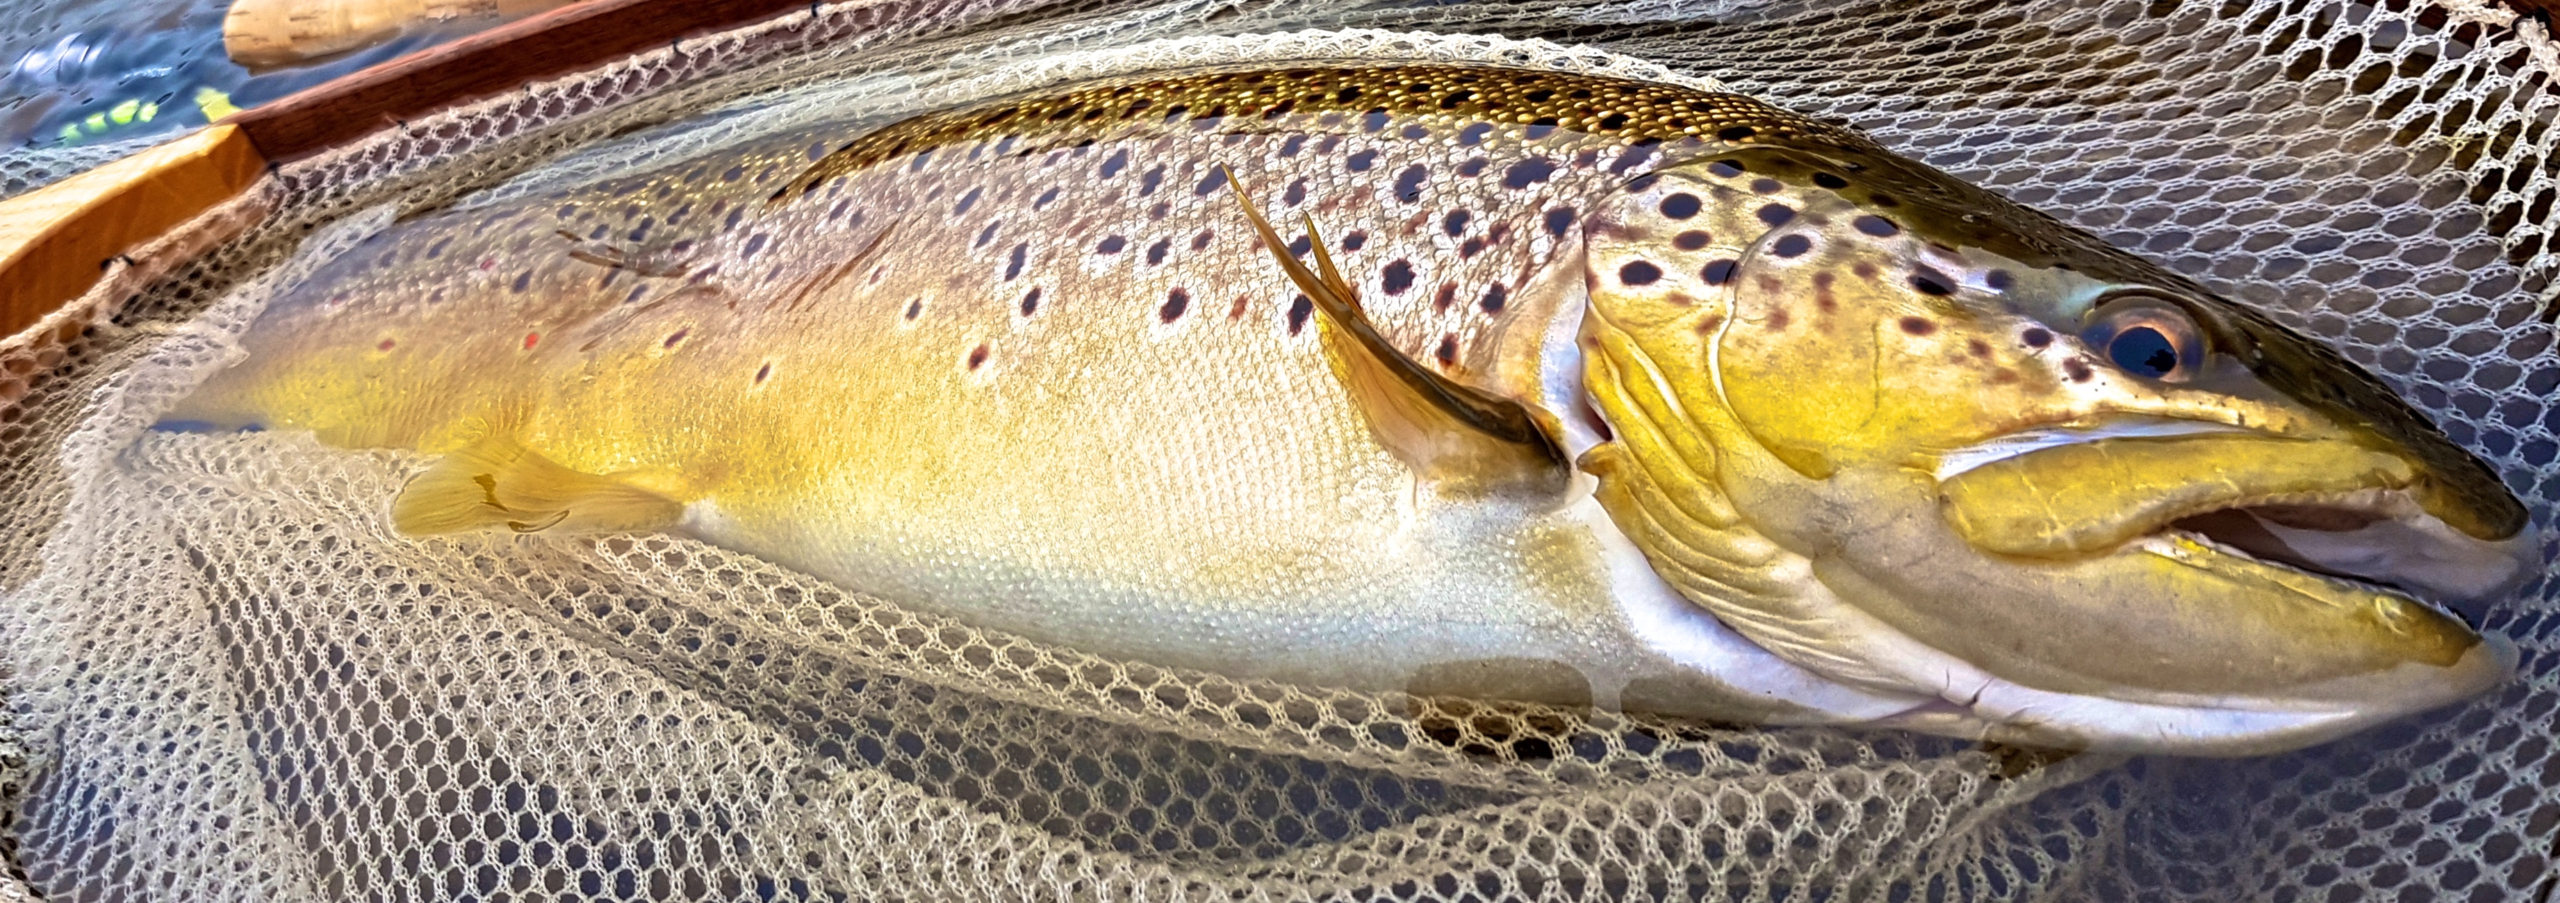 Streamers for Big Fall-Time Brown Trout – The First Cast – Hook